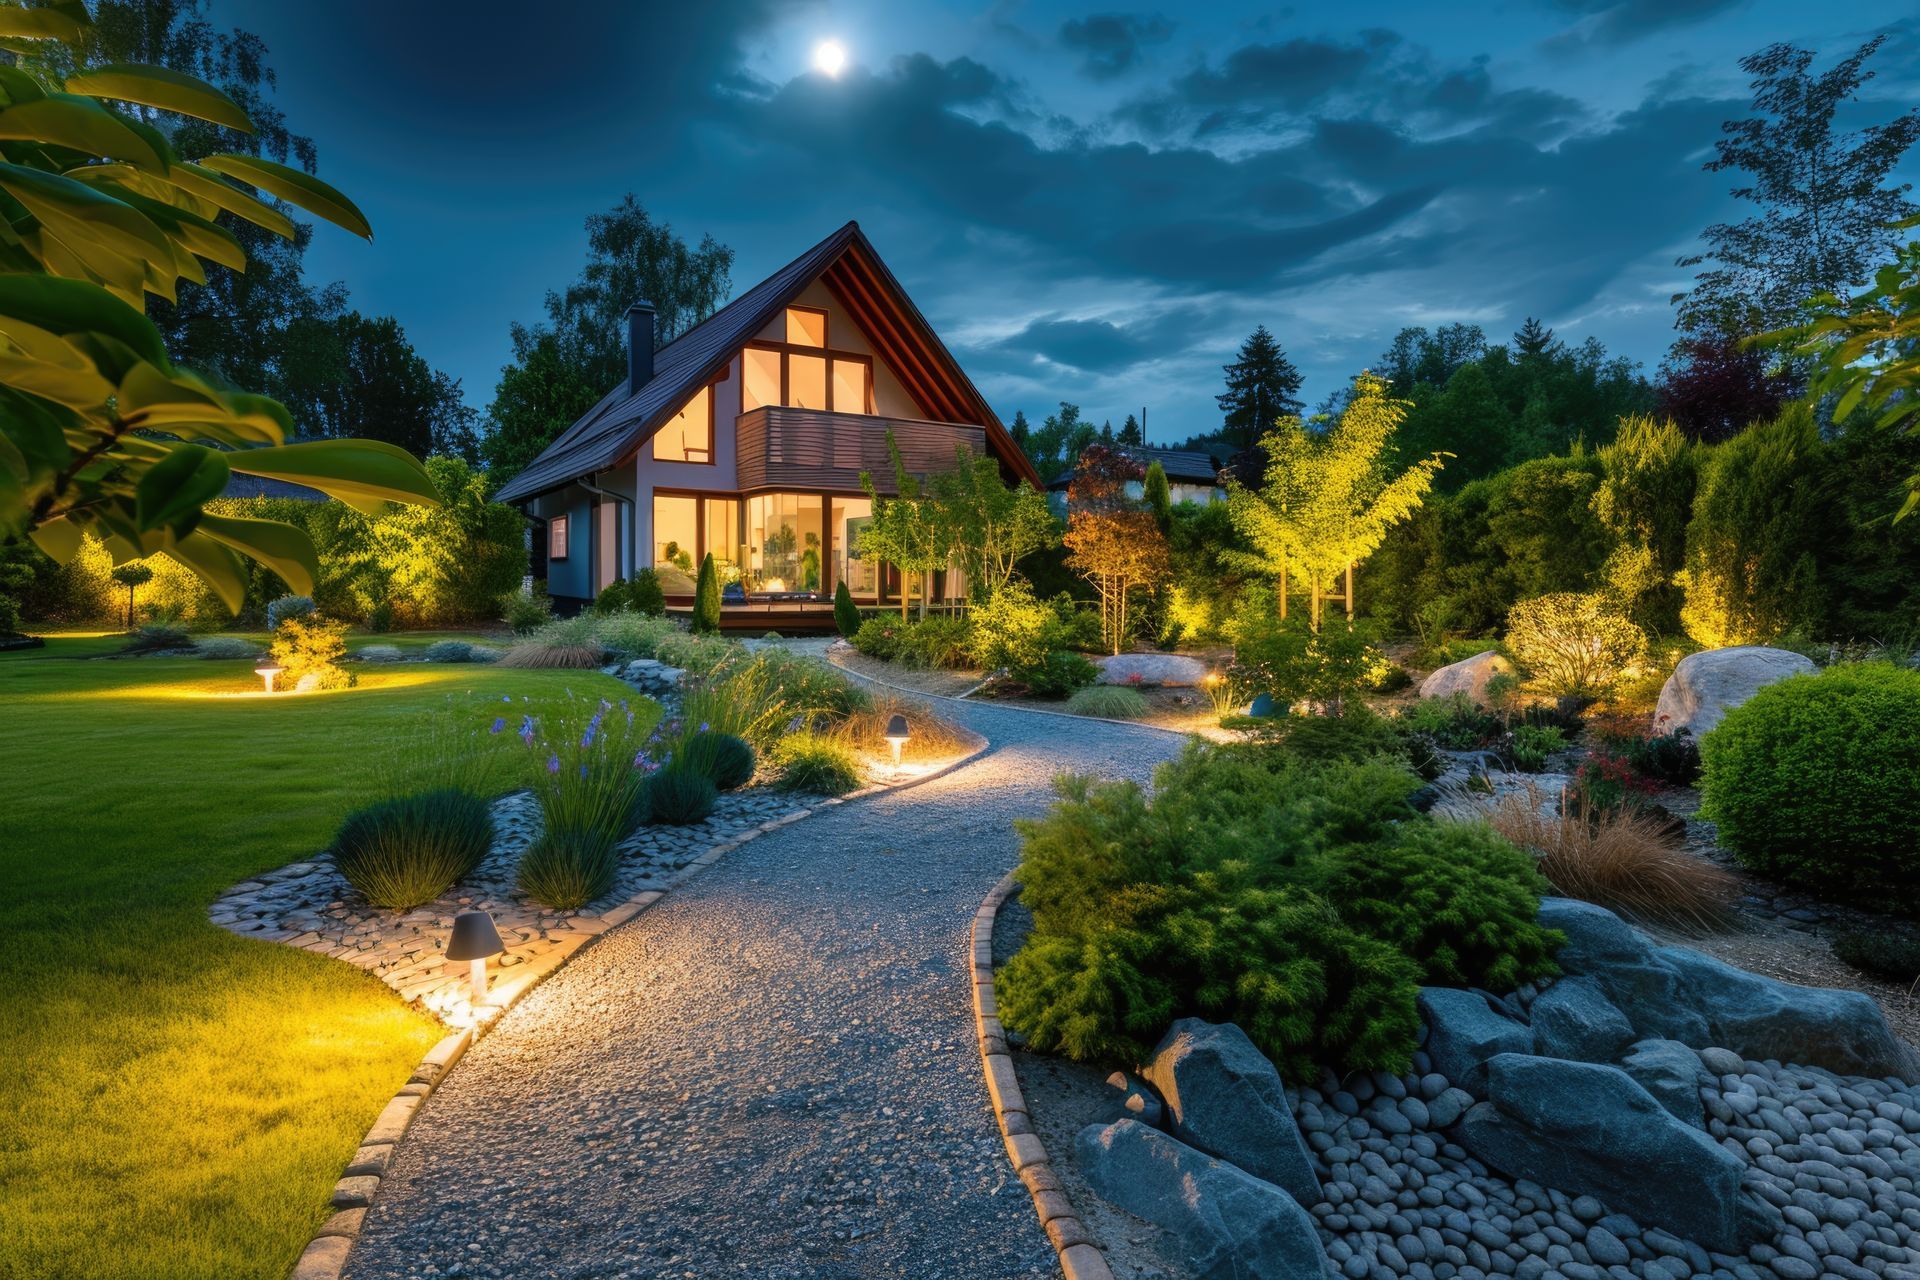 An experienced landscaper's guide to spring gardening in the Pacific Northwest. Learn cleanup tips, 